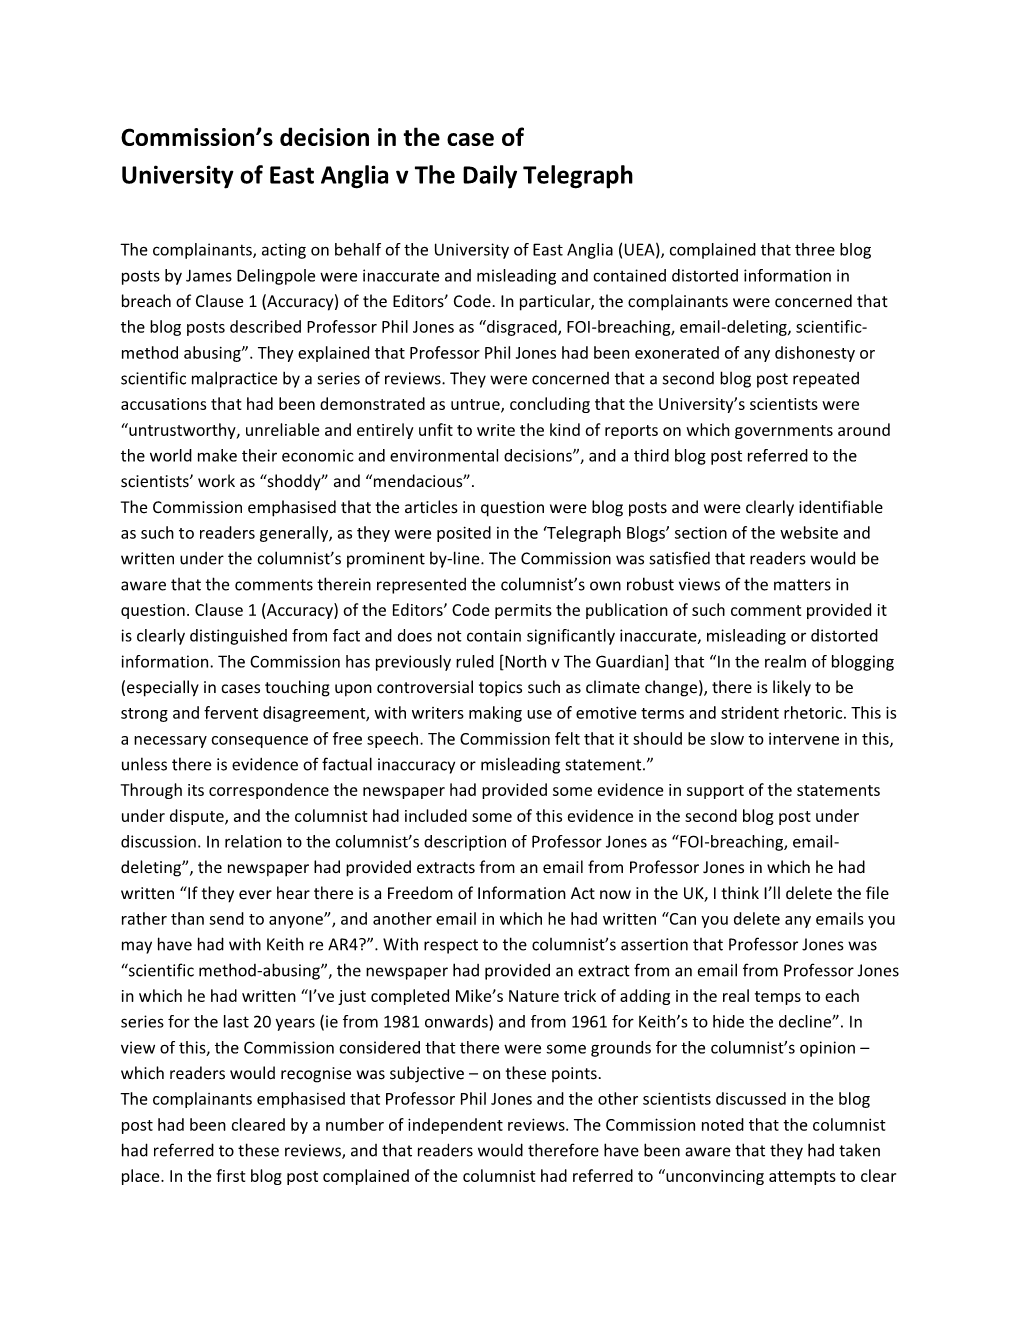 Commission's Decision in the Case of University of East Anglia V the Daily Telegraph